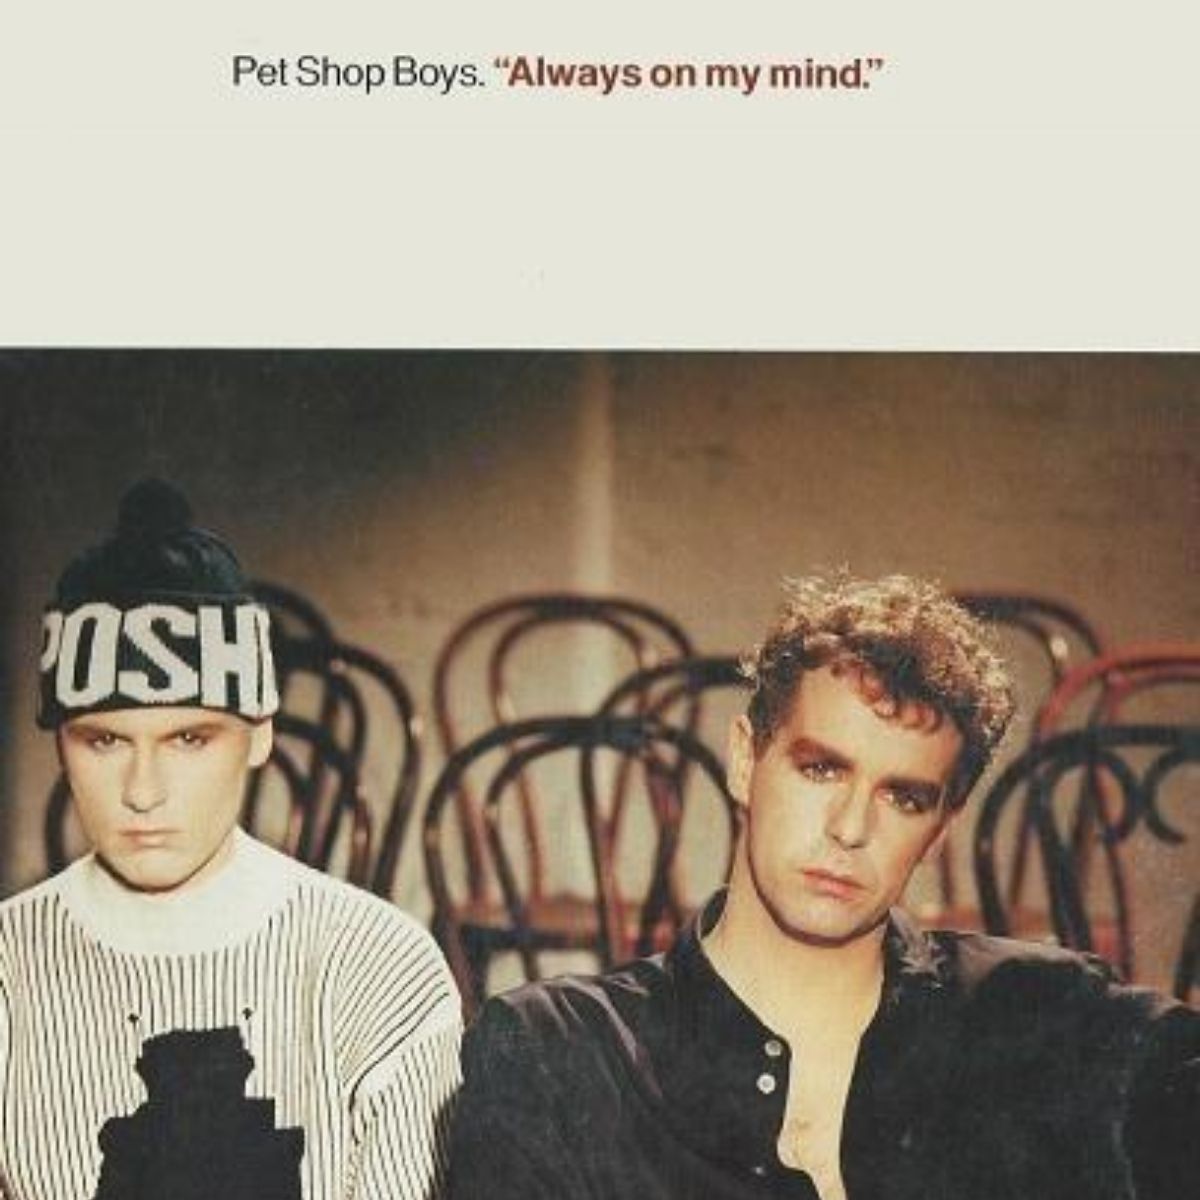 Cover for "Always on My Mind" single "Pet Shop Boys"